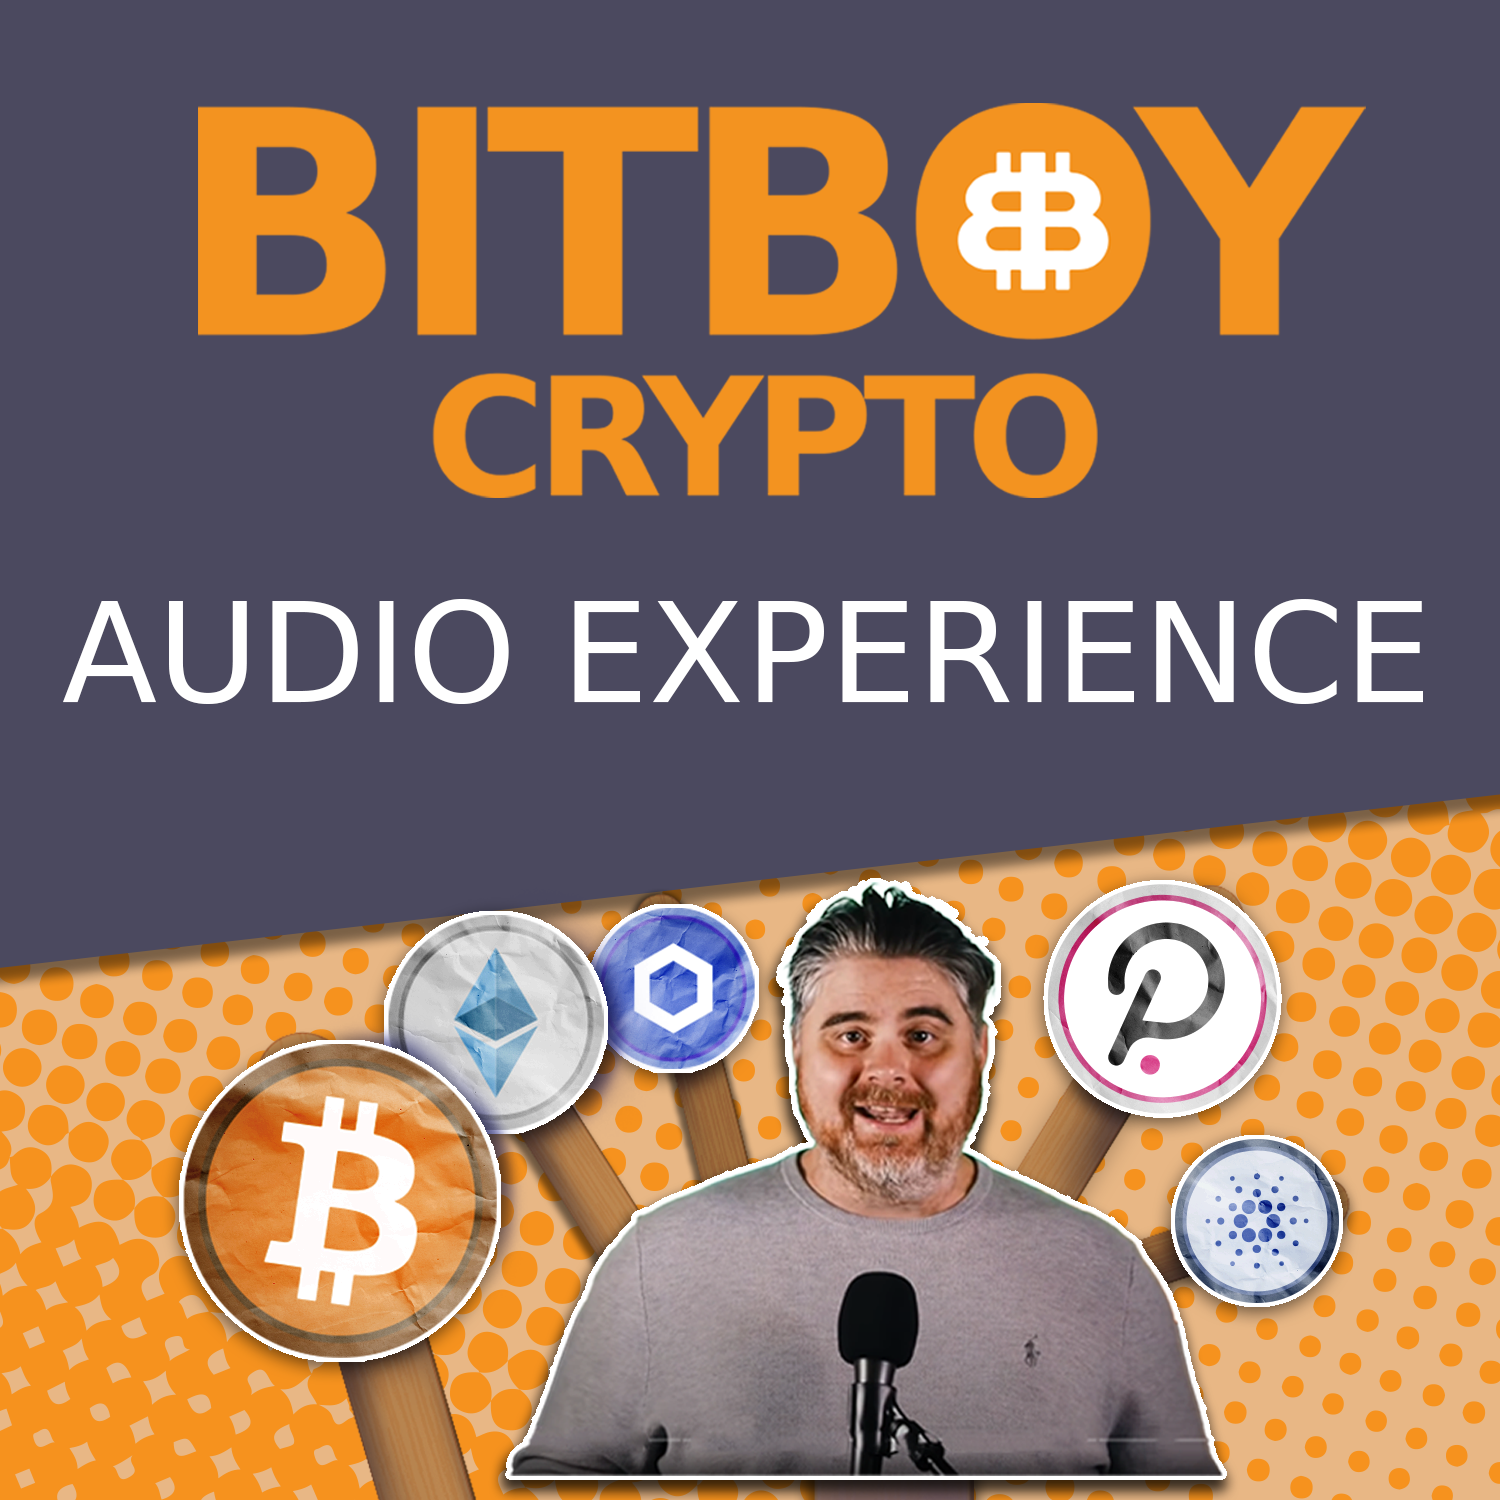 Fresh update on "r. kelly" discussed on The Bitboy Crypto Podcast